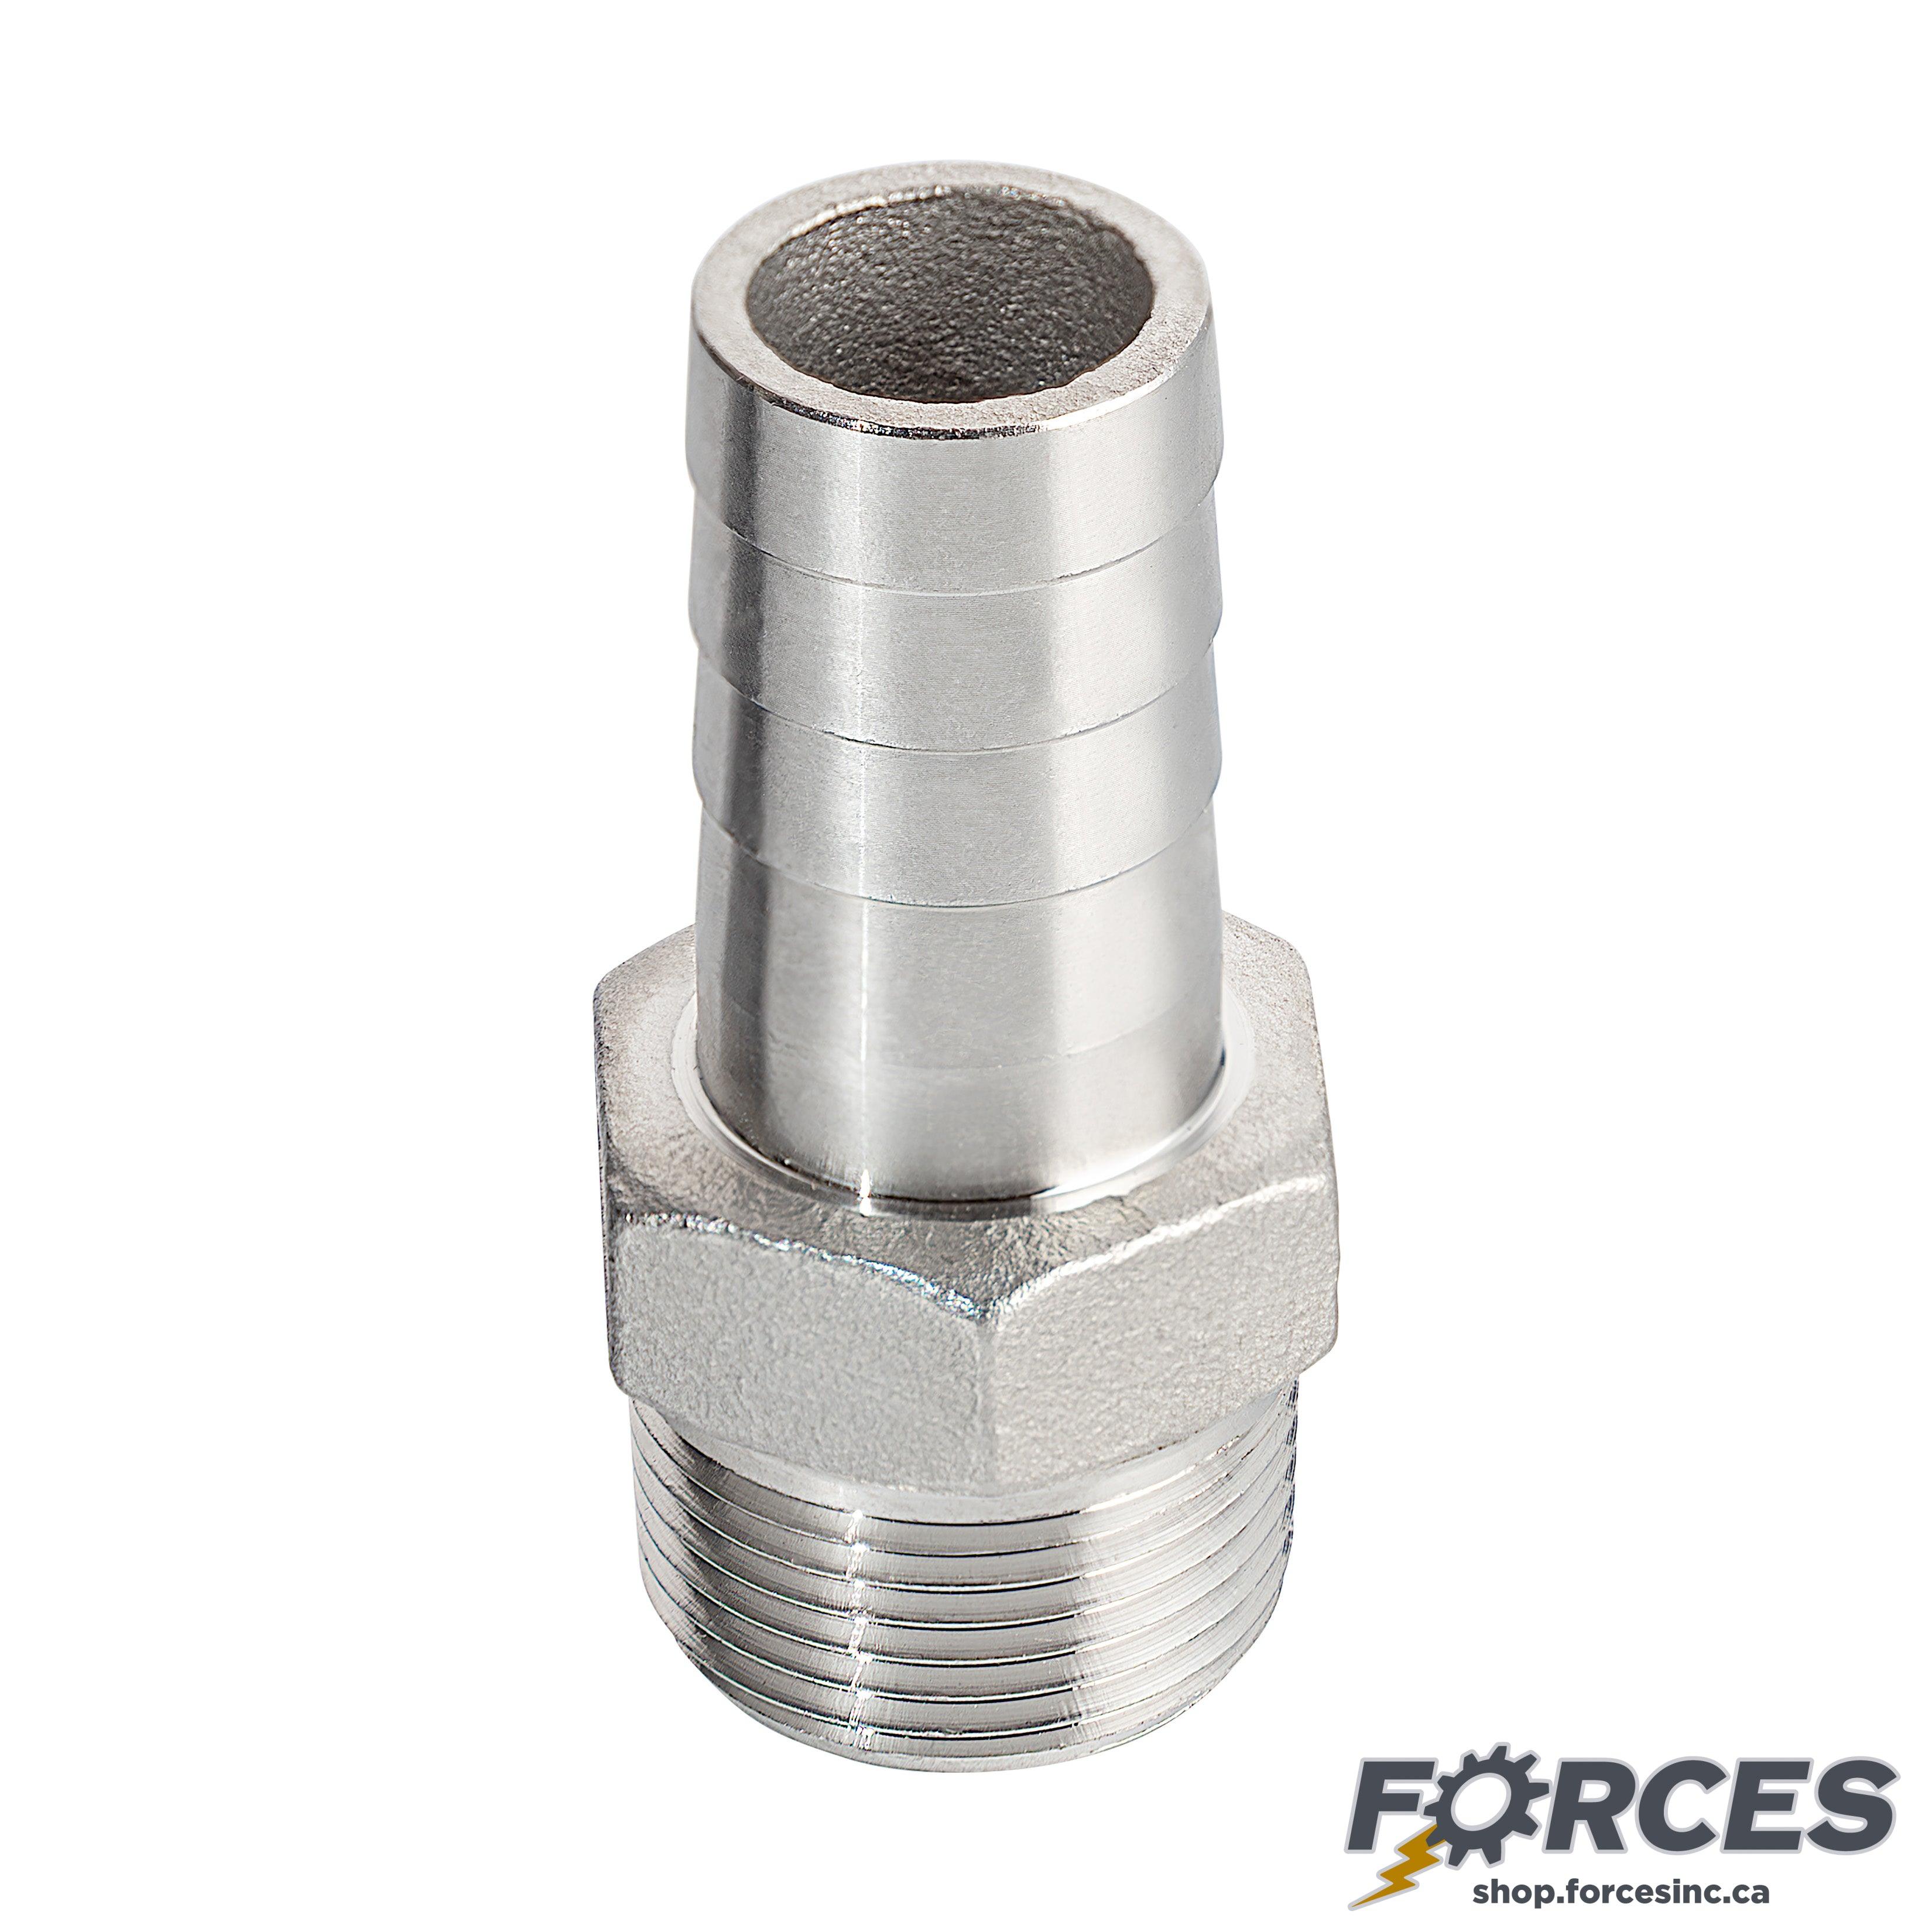 Hose Barb 3/8" x 3/8" NPT #150 - Stainless Steel 316 - Forces Inc